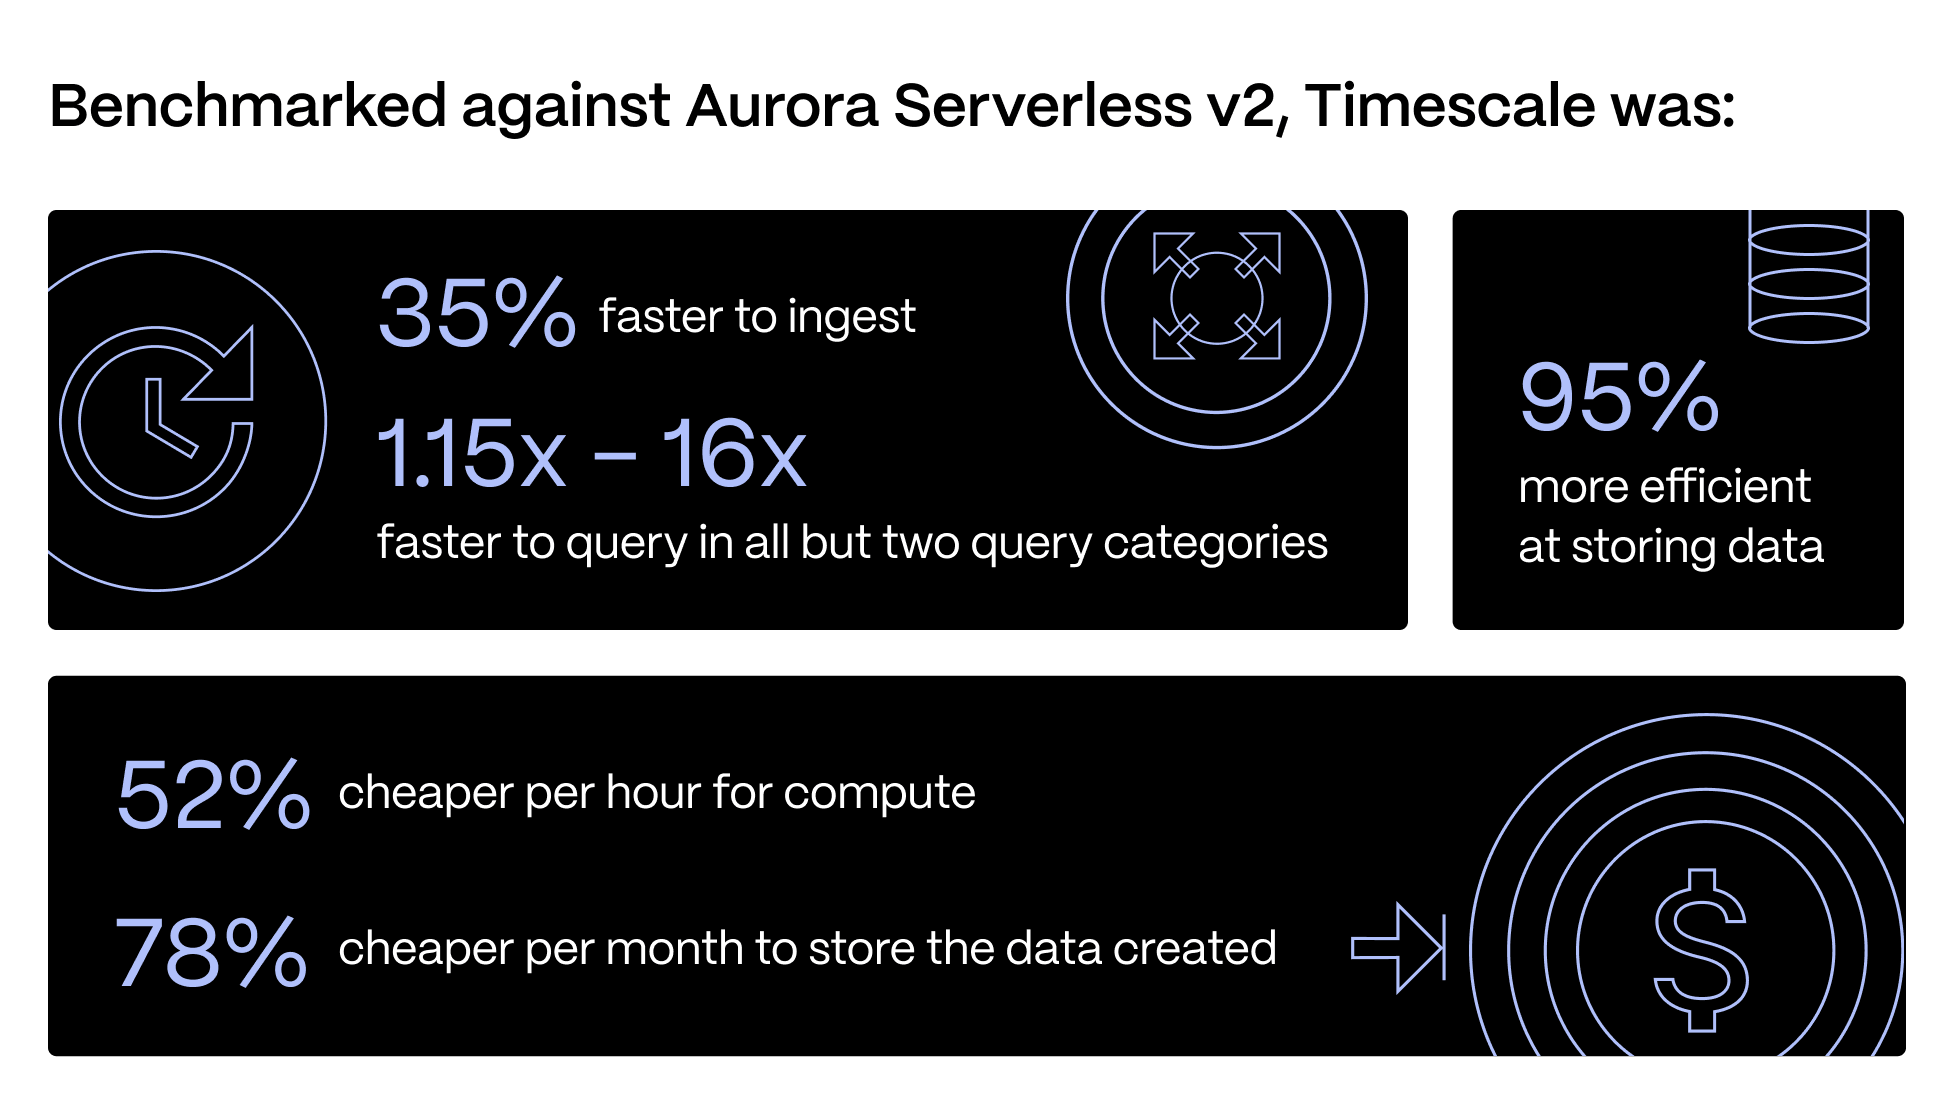 A summary of the benchmark results: Timescale vs. Amazon Aurora Serverless